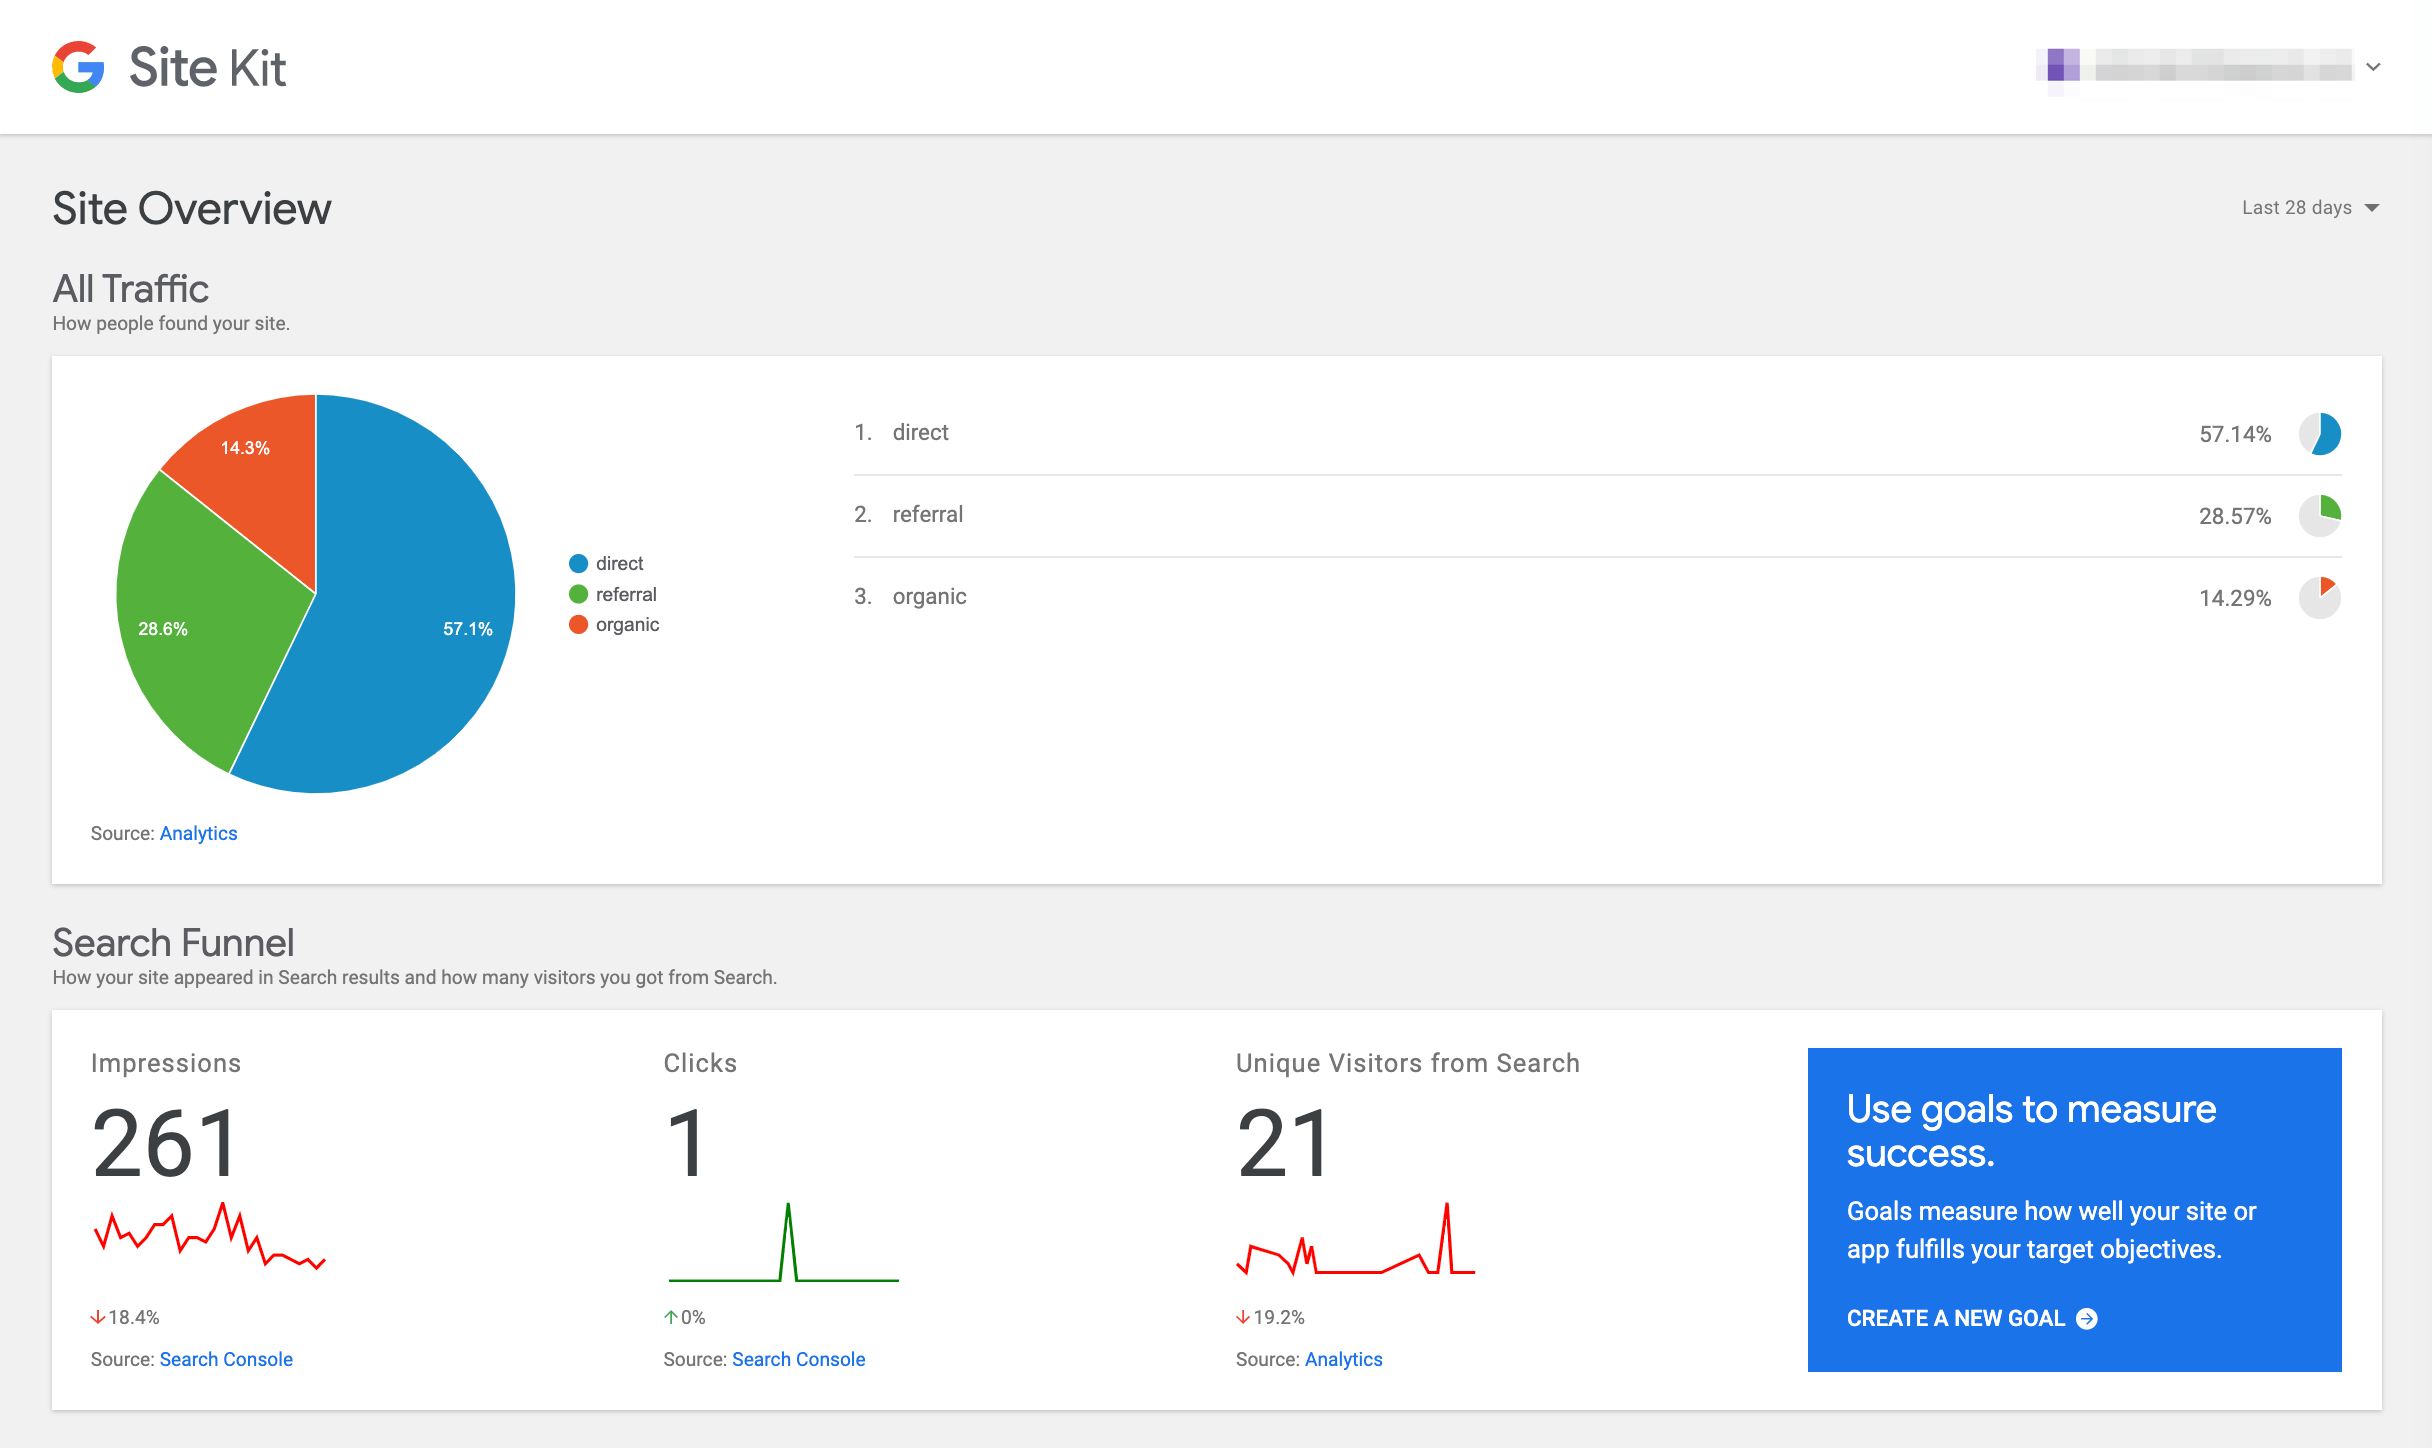 An example of Google Analytics and Search Console data in a Site Kit dashboard.